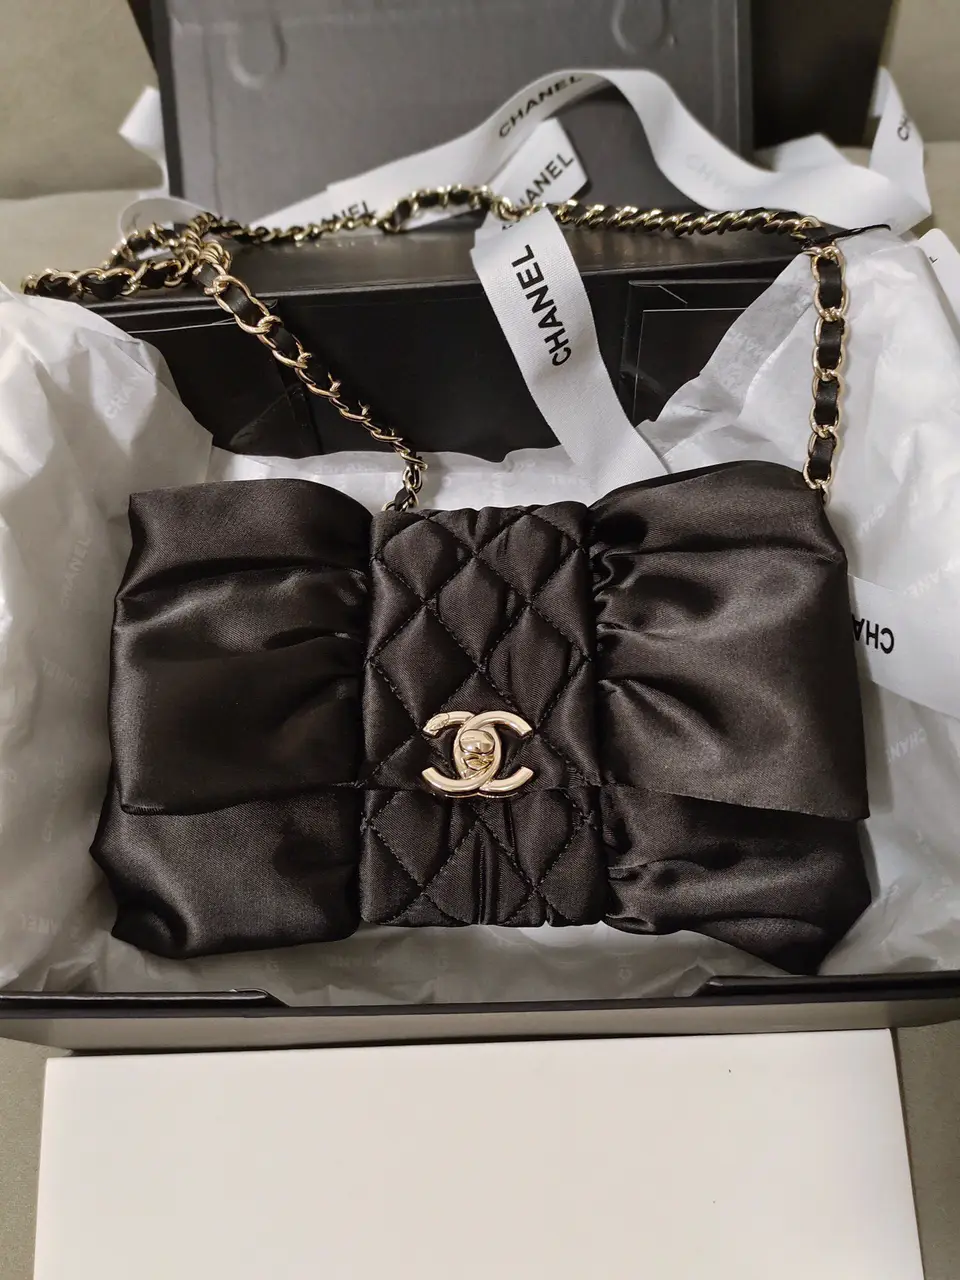 Chanel 23a Bow dinner bag💋💋, Gallery posted by Vivian💗💗💗